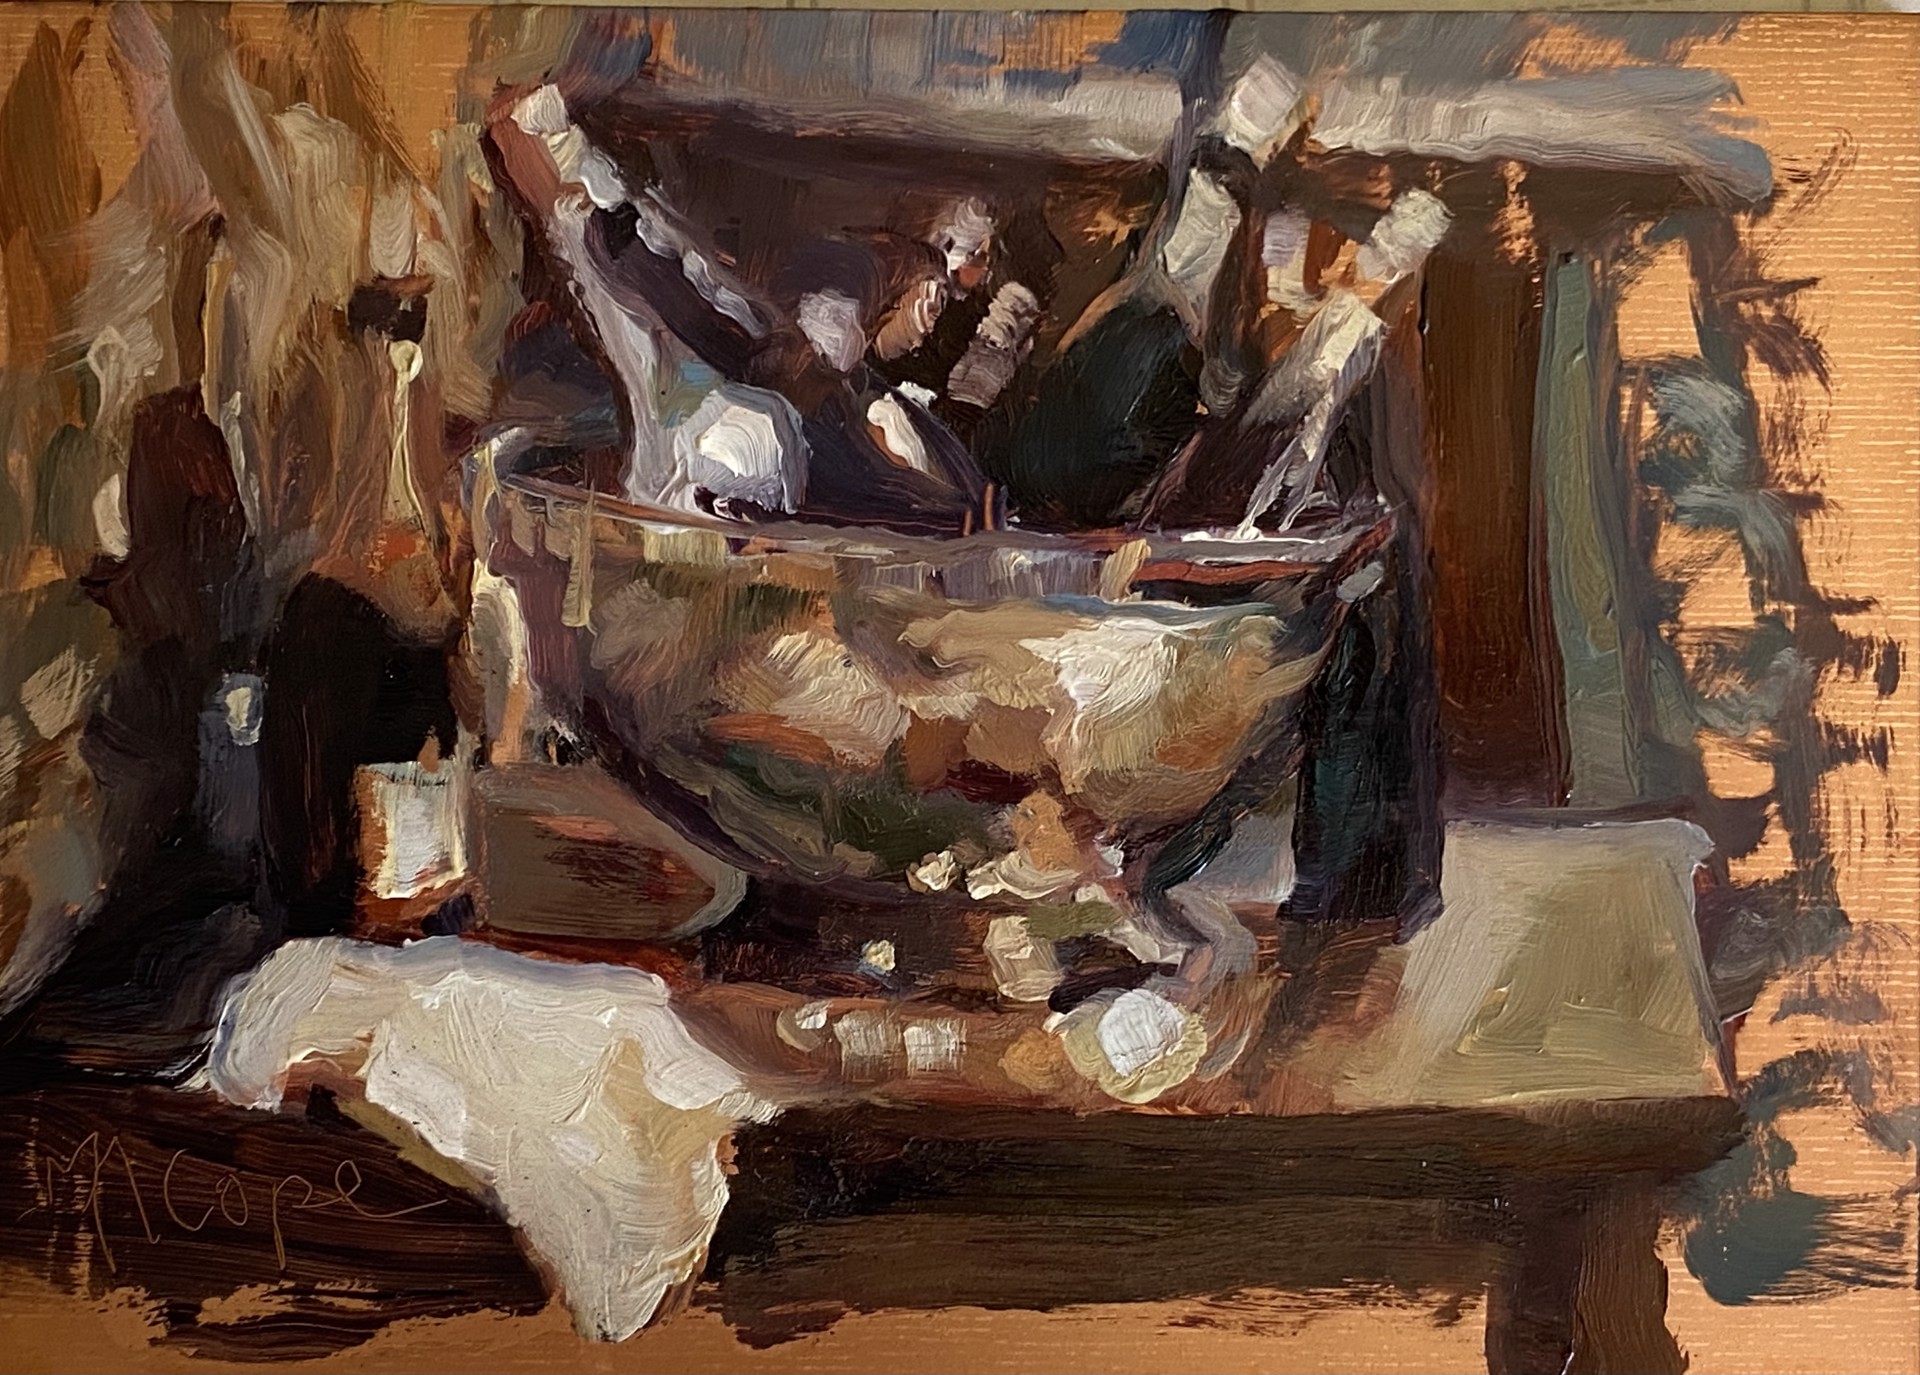 "Ice Bucket" original oil painting by Mary Ann Cope